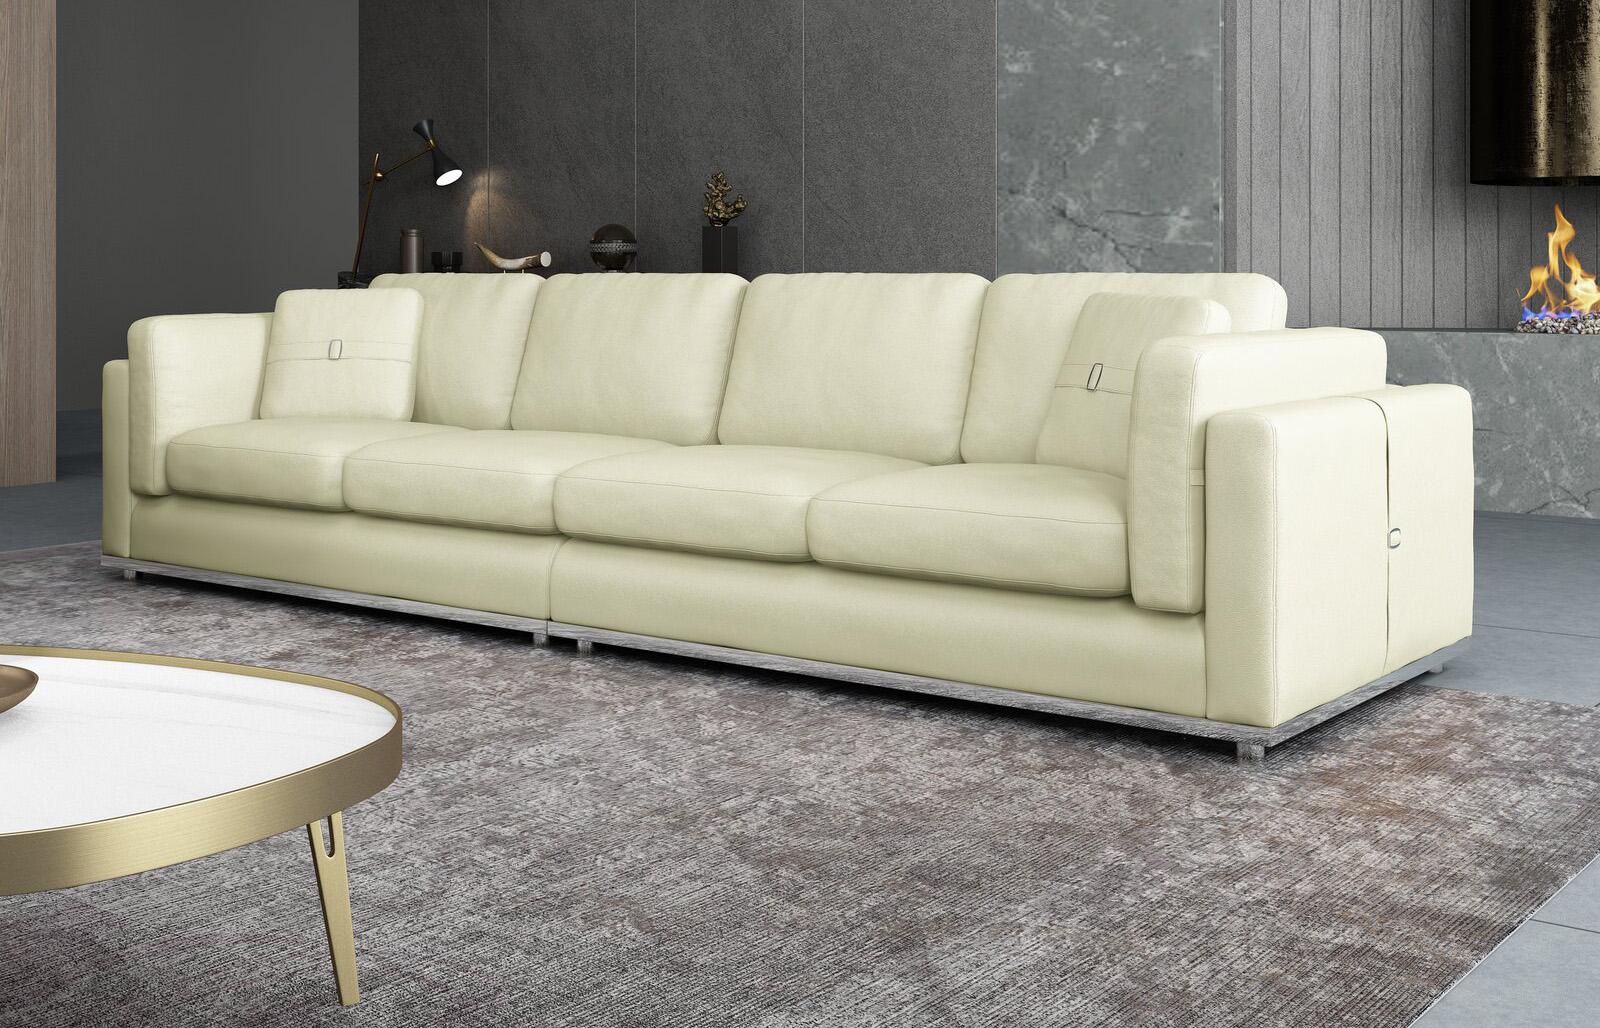 Contemporary, Modern Sofa PICASSO EF-25551-4S in Off-White Leather